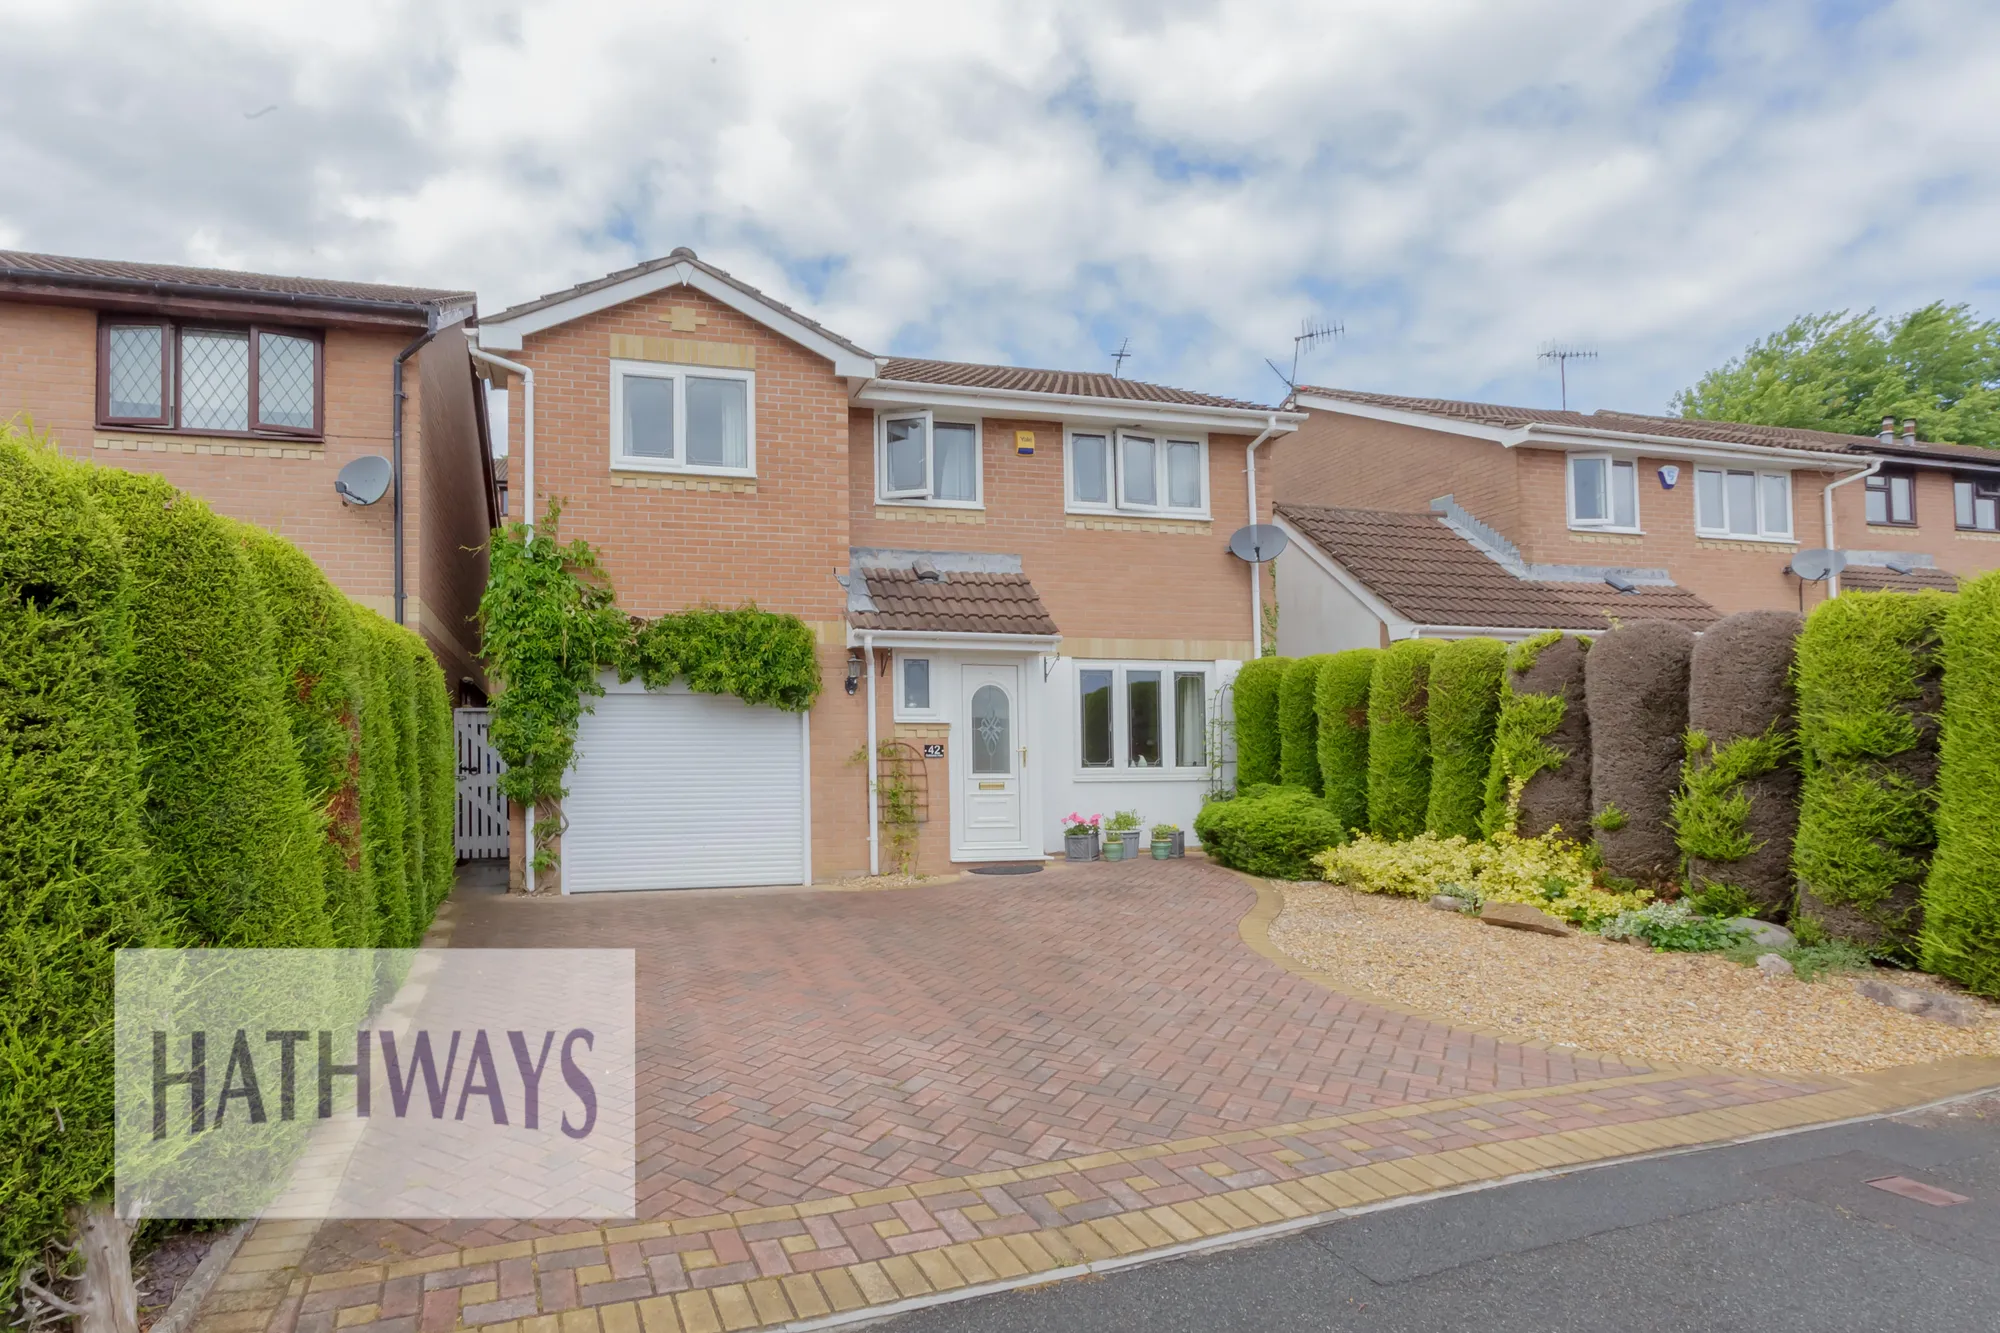 4 bed detached house for sale in Oaklands View, Cwmbran - Property Image 1